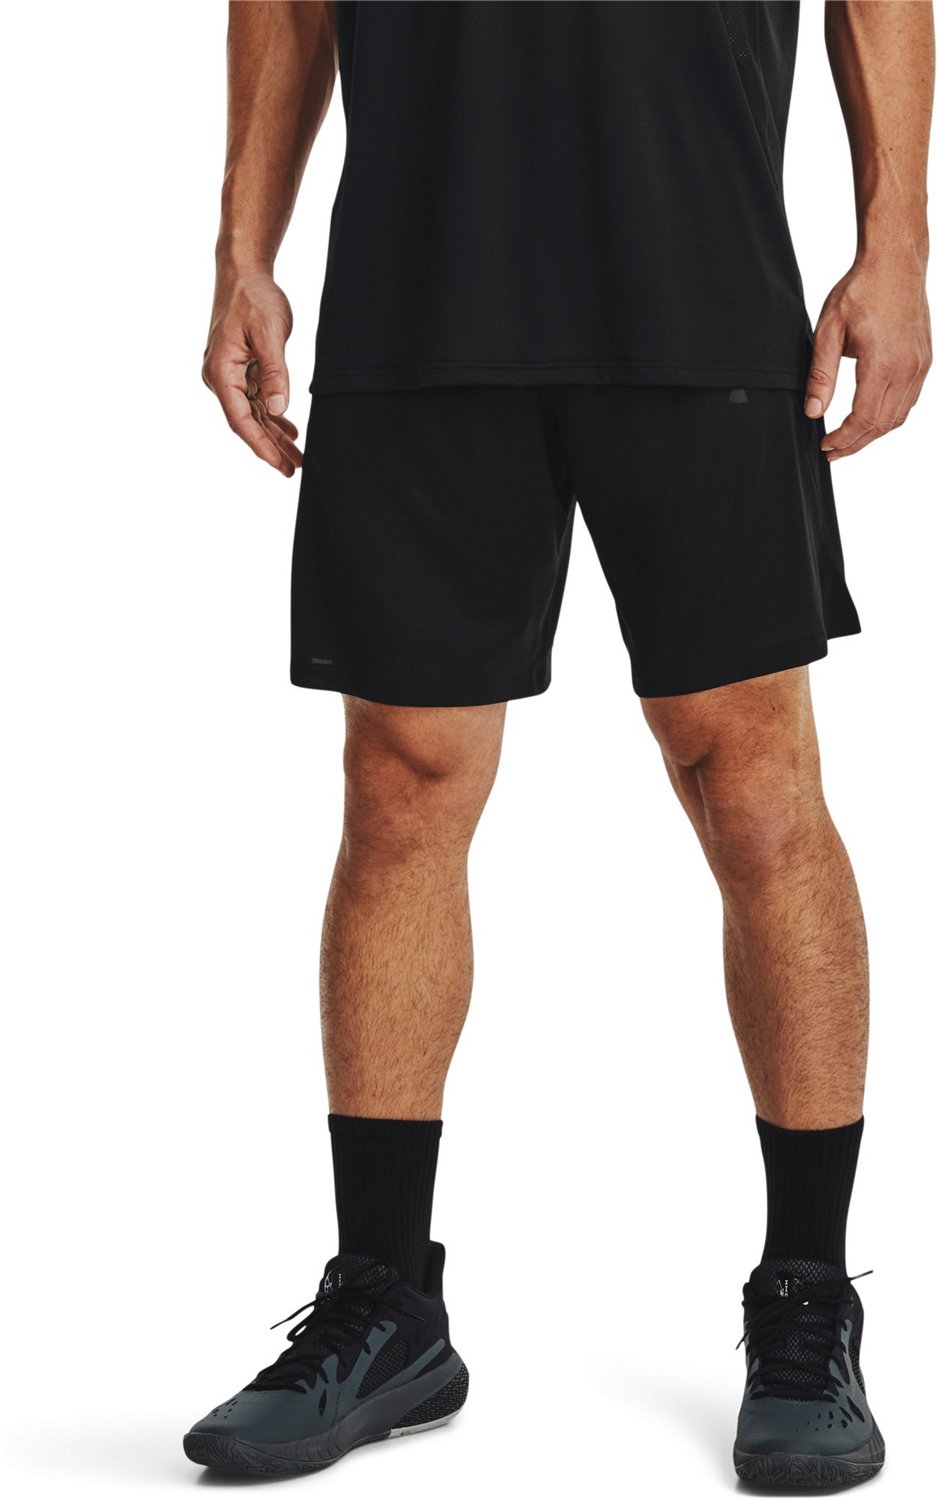 Under Armour Men's Baseline Shorts 10 in